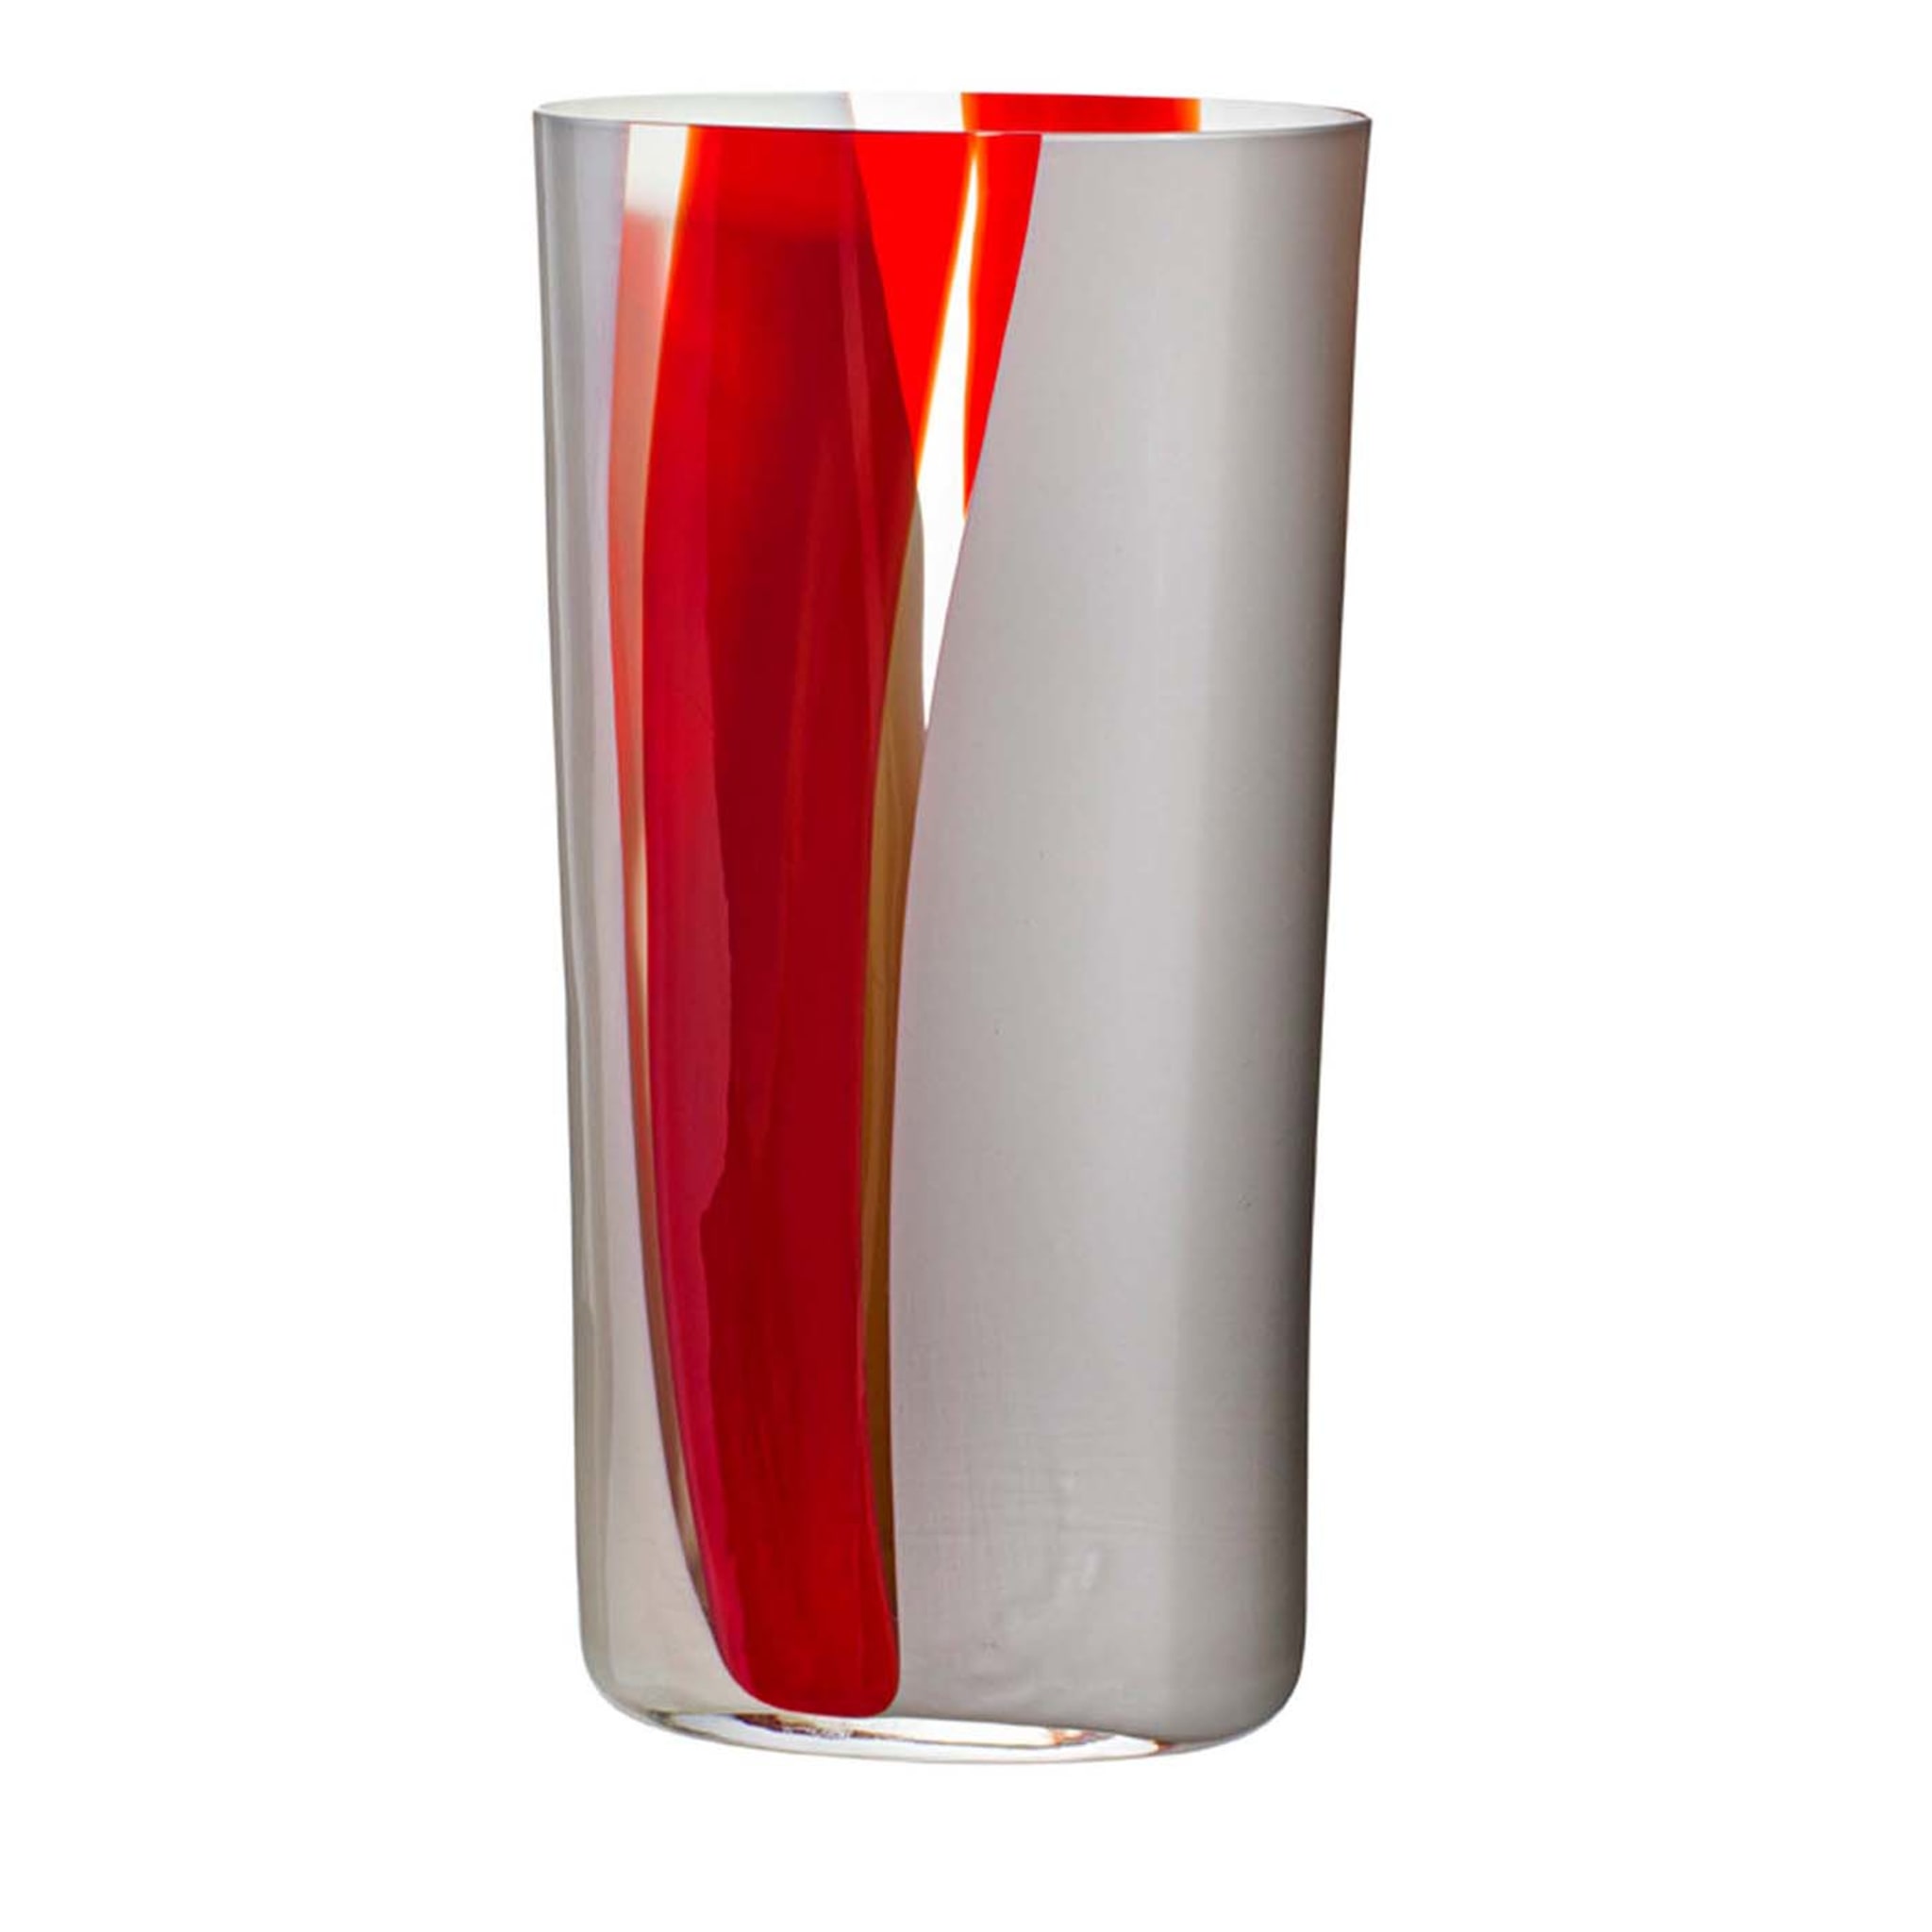 Ovale White and Red Stripes Vase by Carlo Moretti #2 - Main view